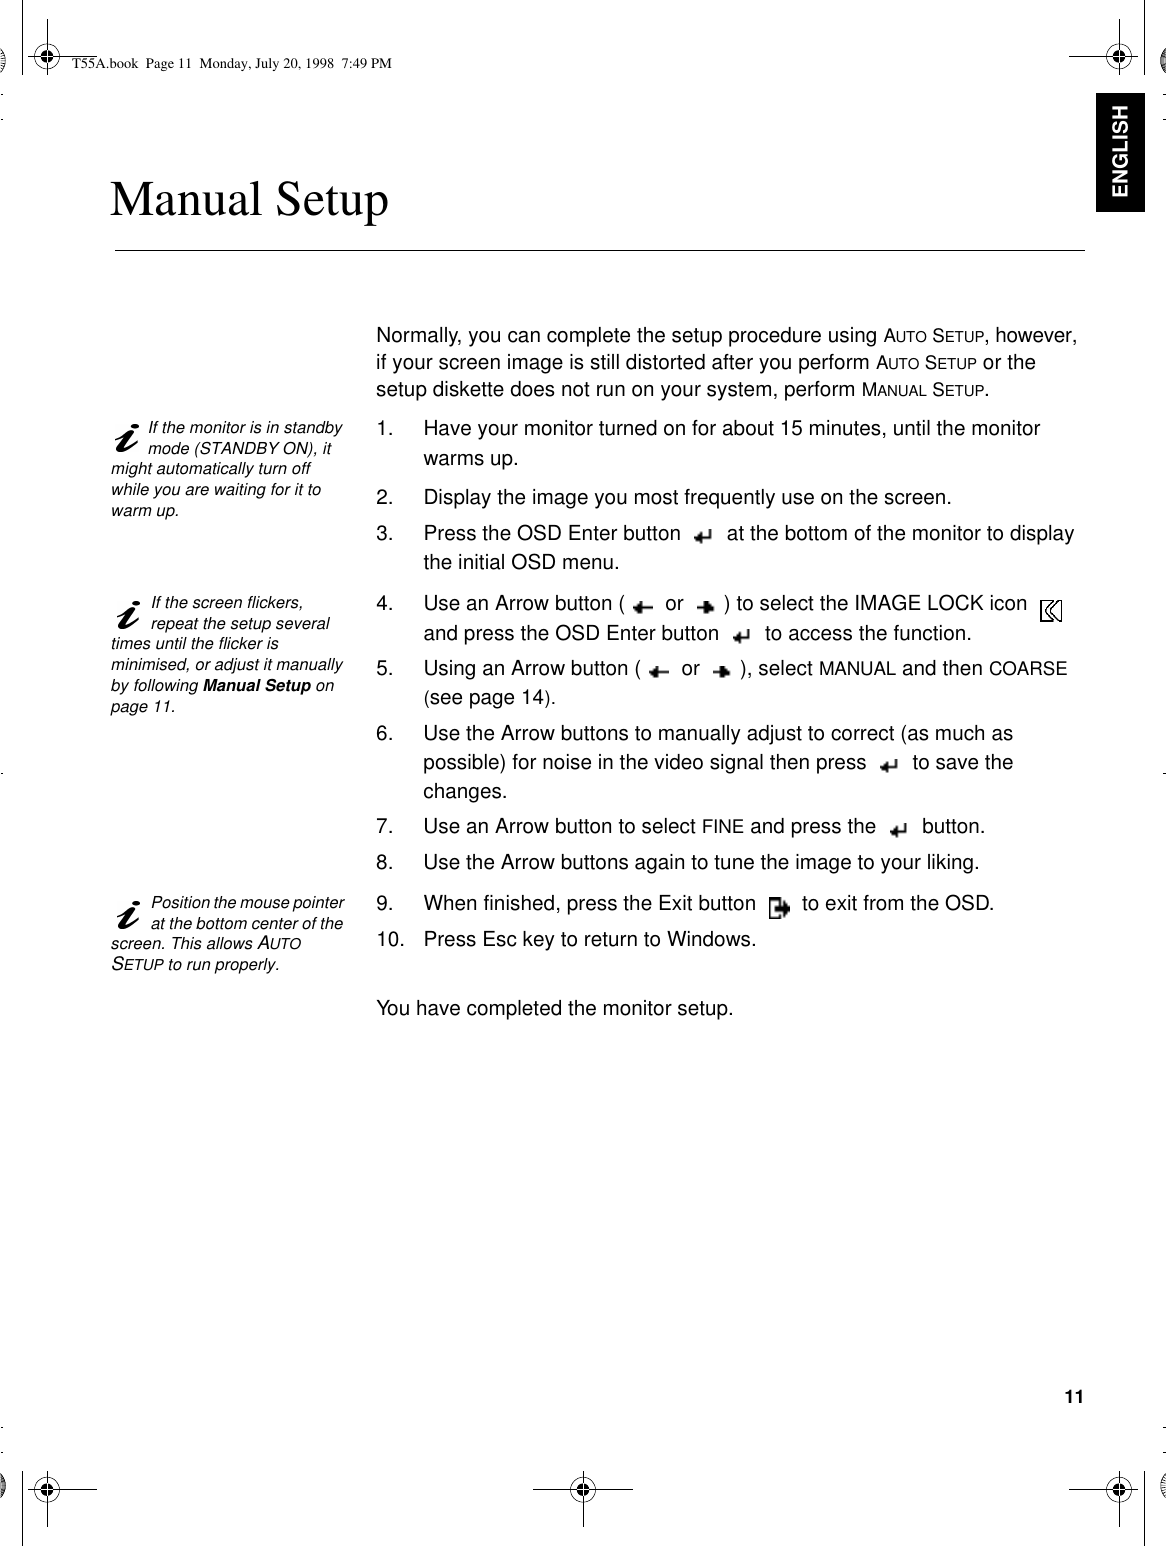 11ENGLISHManual SetupNormally, you can complete the setup procedure using AUTO SETUP, however, if your screen image is still distorted after you perform AUTO SETUP or the setup diskette does not run on your system, perform MANUAL SETUP.If the monitor is in standby mode (STANDBY ON), it might automatically turn off while you are waiting for it to warm up.1. Have your monitor turned on for about 15 minutes, until the monitor warms up.2. Display the image you most frequently use on the screen.3. Press the OSD Enter button  at the bottom of the monitor to display the initial OSD menu.If the screen flickers, repeat the setup several times until the flicker is minimised, or adjust it manually by following Manual Setup on page 11.4. Use an Arrow button ( or ) to select the IMAGE LOCK icon  and press the OSD Enter button  to access the function.5. Using an Arrow button ( or ), select MANUAL and then COARSE (see page14).  6. Use the Arrow buttons to manually adjust to correct (as much as possible) for noise in the video signal then press  to save the changes.7. Use an Arrow button to select FINE and press the  button.8. Use the Arrow buttons again to tune the image to your liking.Position the mouse pointer at the bottom center of the screen. This allows AUTO SETUP to run properly.9. When finished, press the Exit button  to exit from the OSD.10. Press Esc key to return to Windows.You have completed the monitor setup.T55A.book  Page 11  Monday, July 20, 1998  7:49 PM